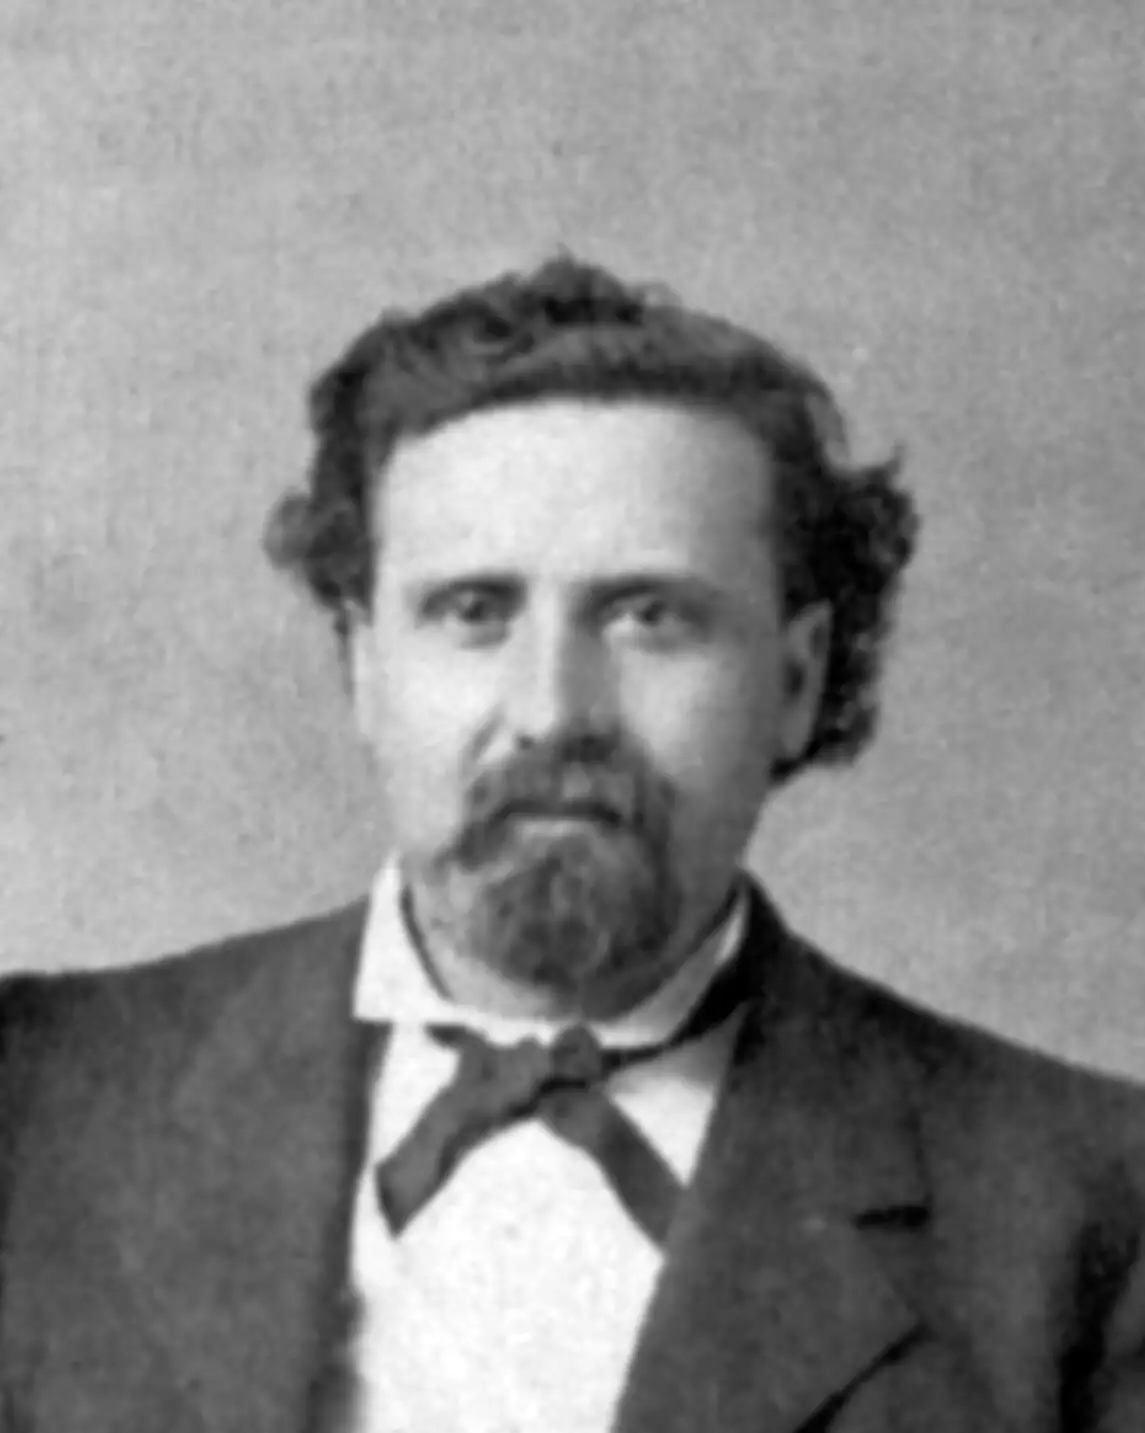 Photo of a light skinned man with dark hair and a goatee. he is wearing a dark suit jacket, white collard shirt, and bow tie.